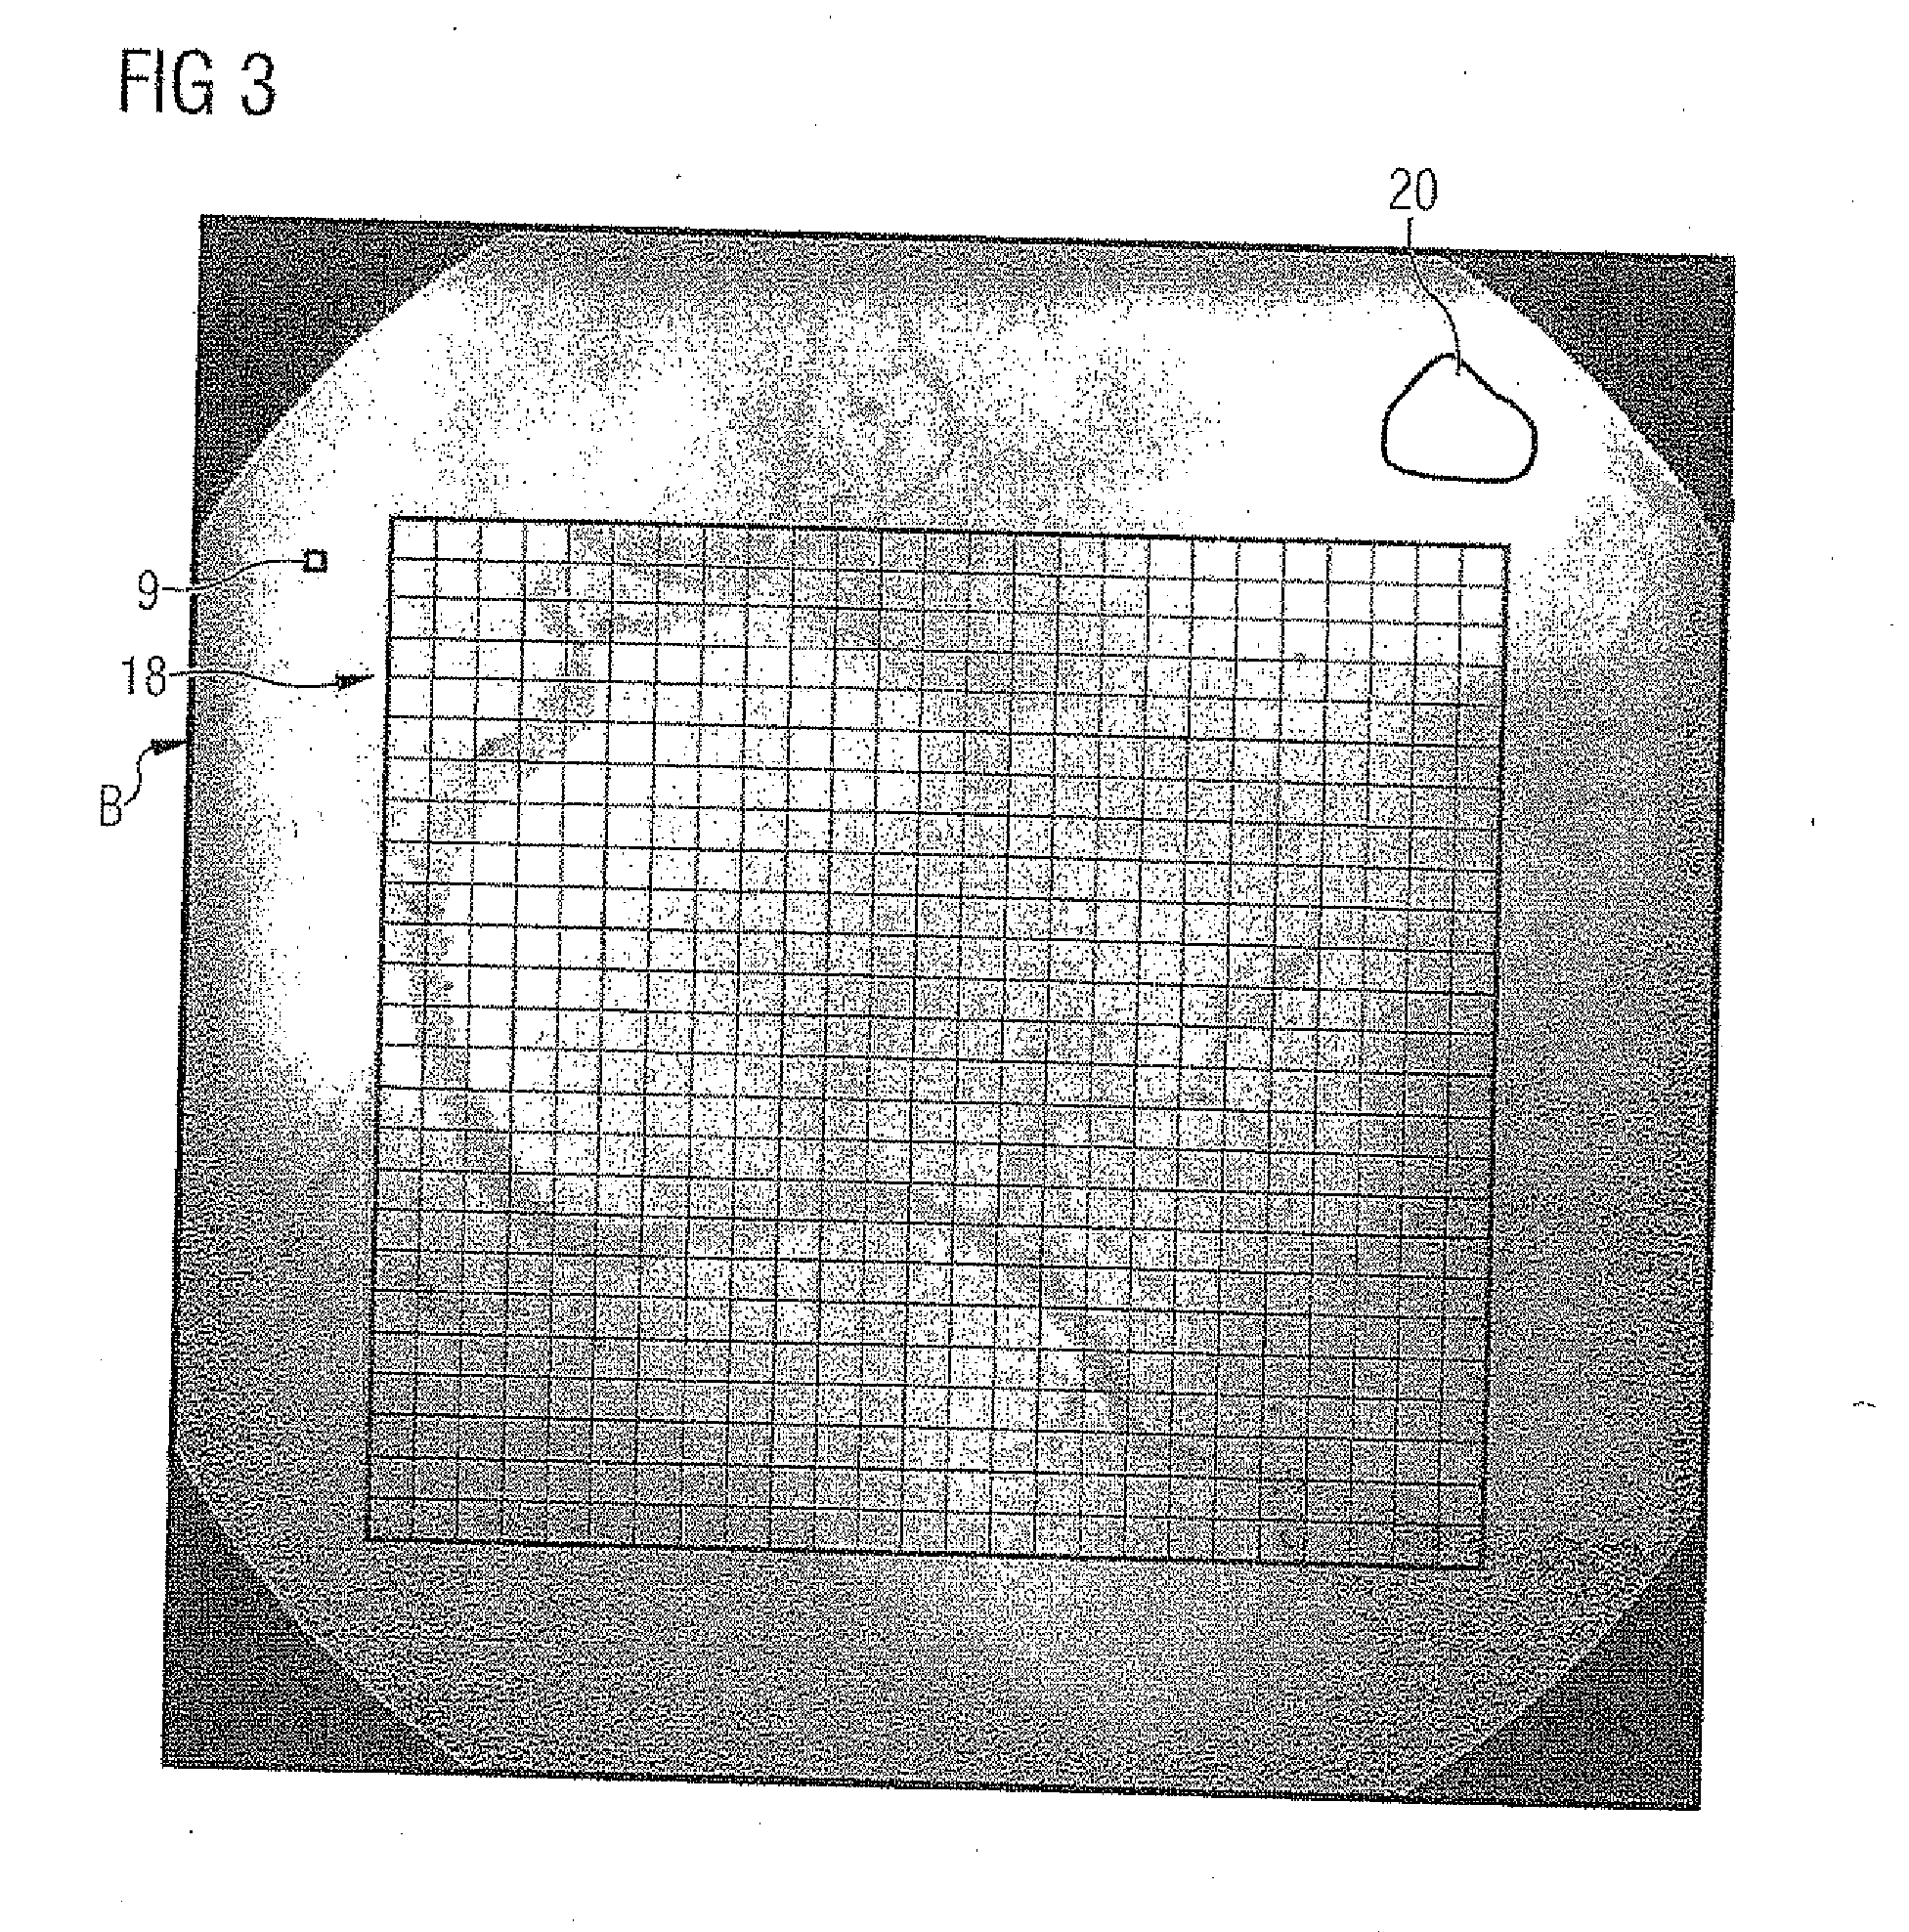 Image evaluation method for two-dimensional projection images and objects corresponding thereto